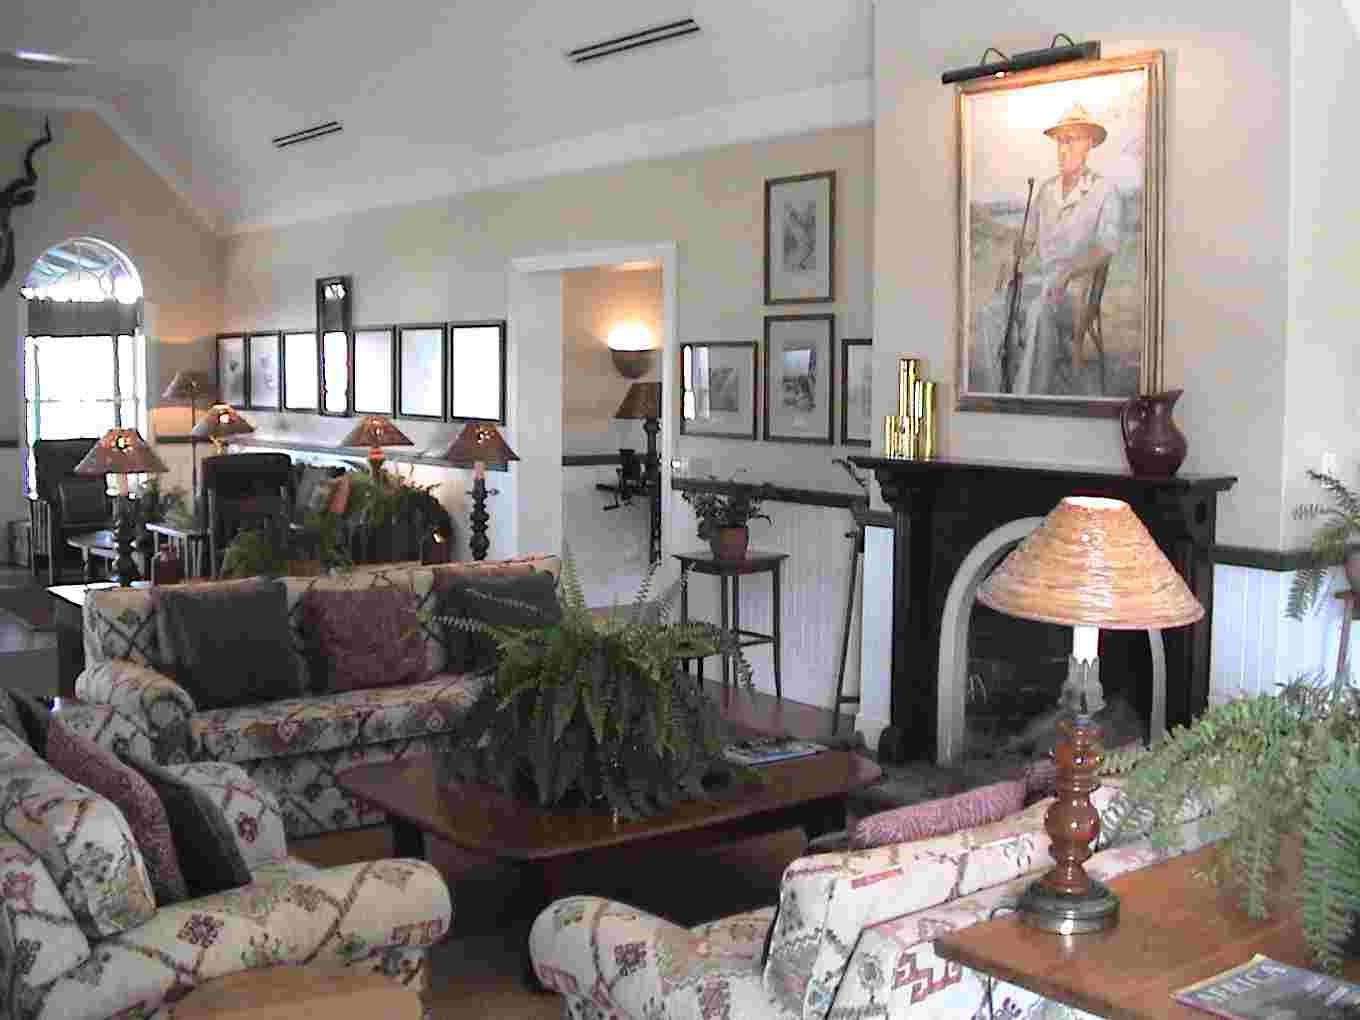 The lounge area and a painting of Harry Kirkman, who was the first director of Kruger National Park.